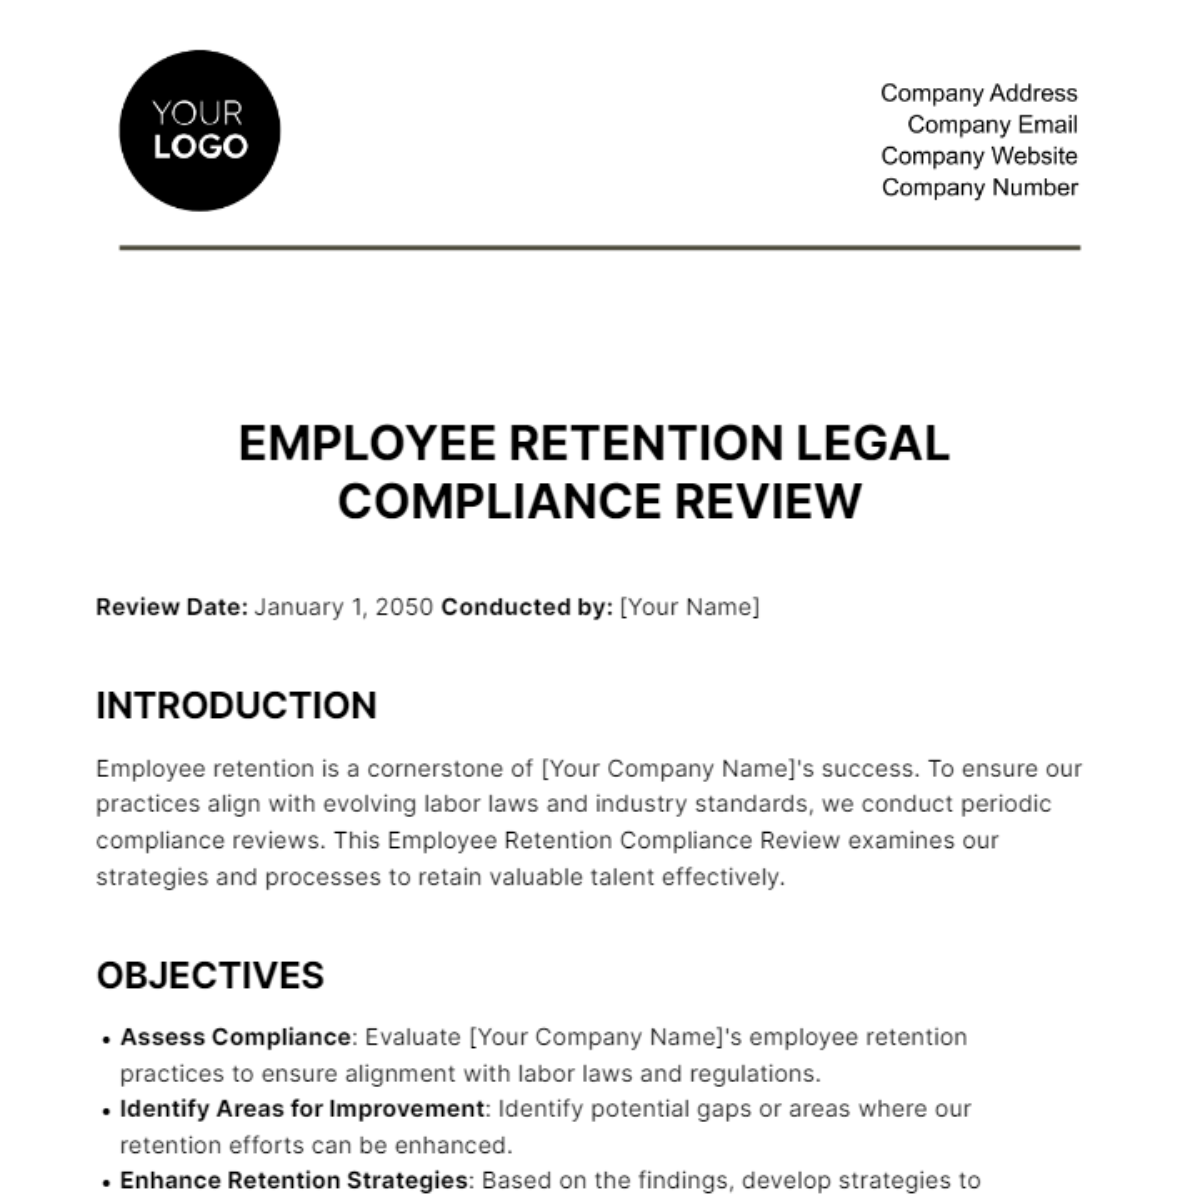 Employee Retention Legal Compliance Review HR Template